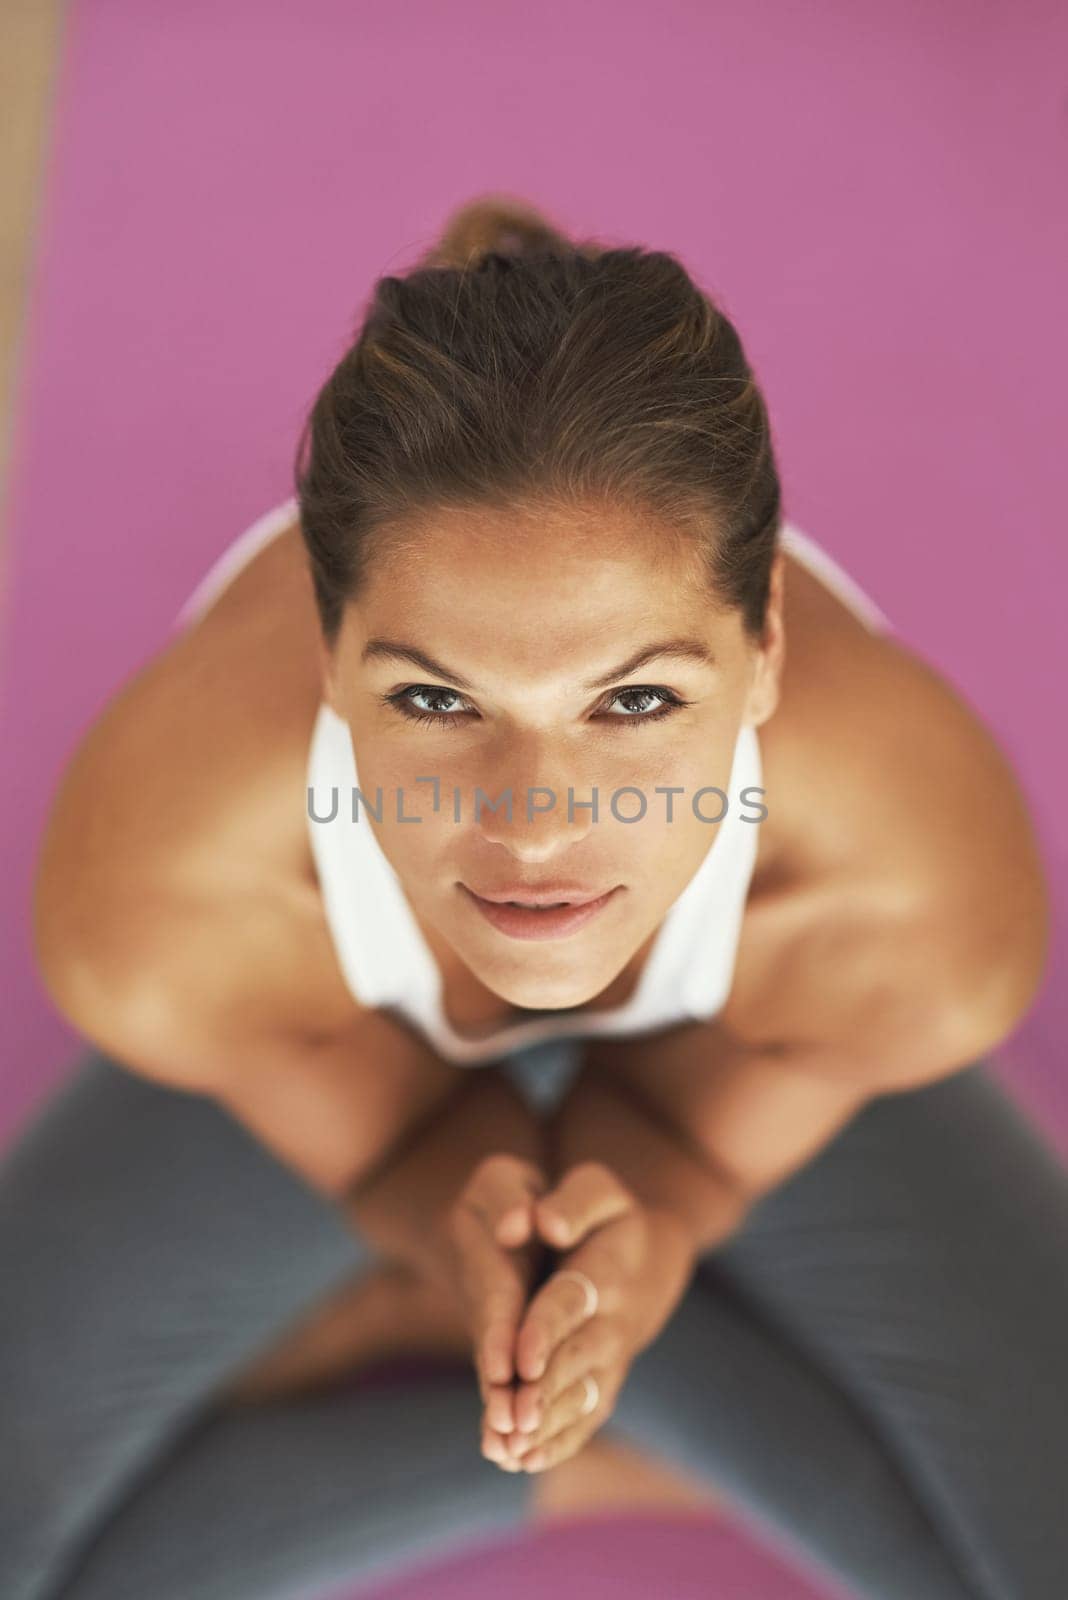 Yoga is an all-natural detox. High angle shot of a young woman practicing yoga at home